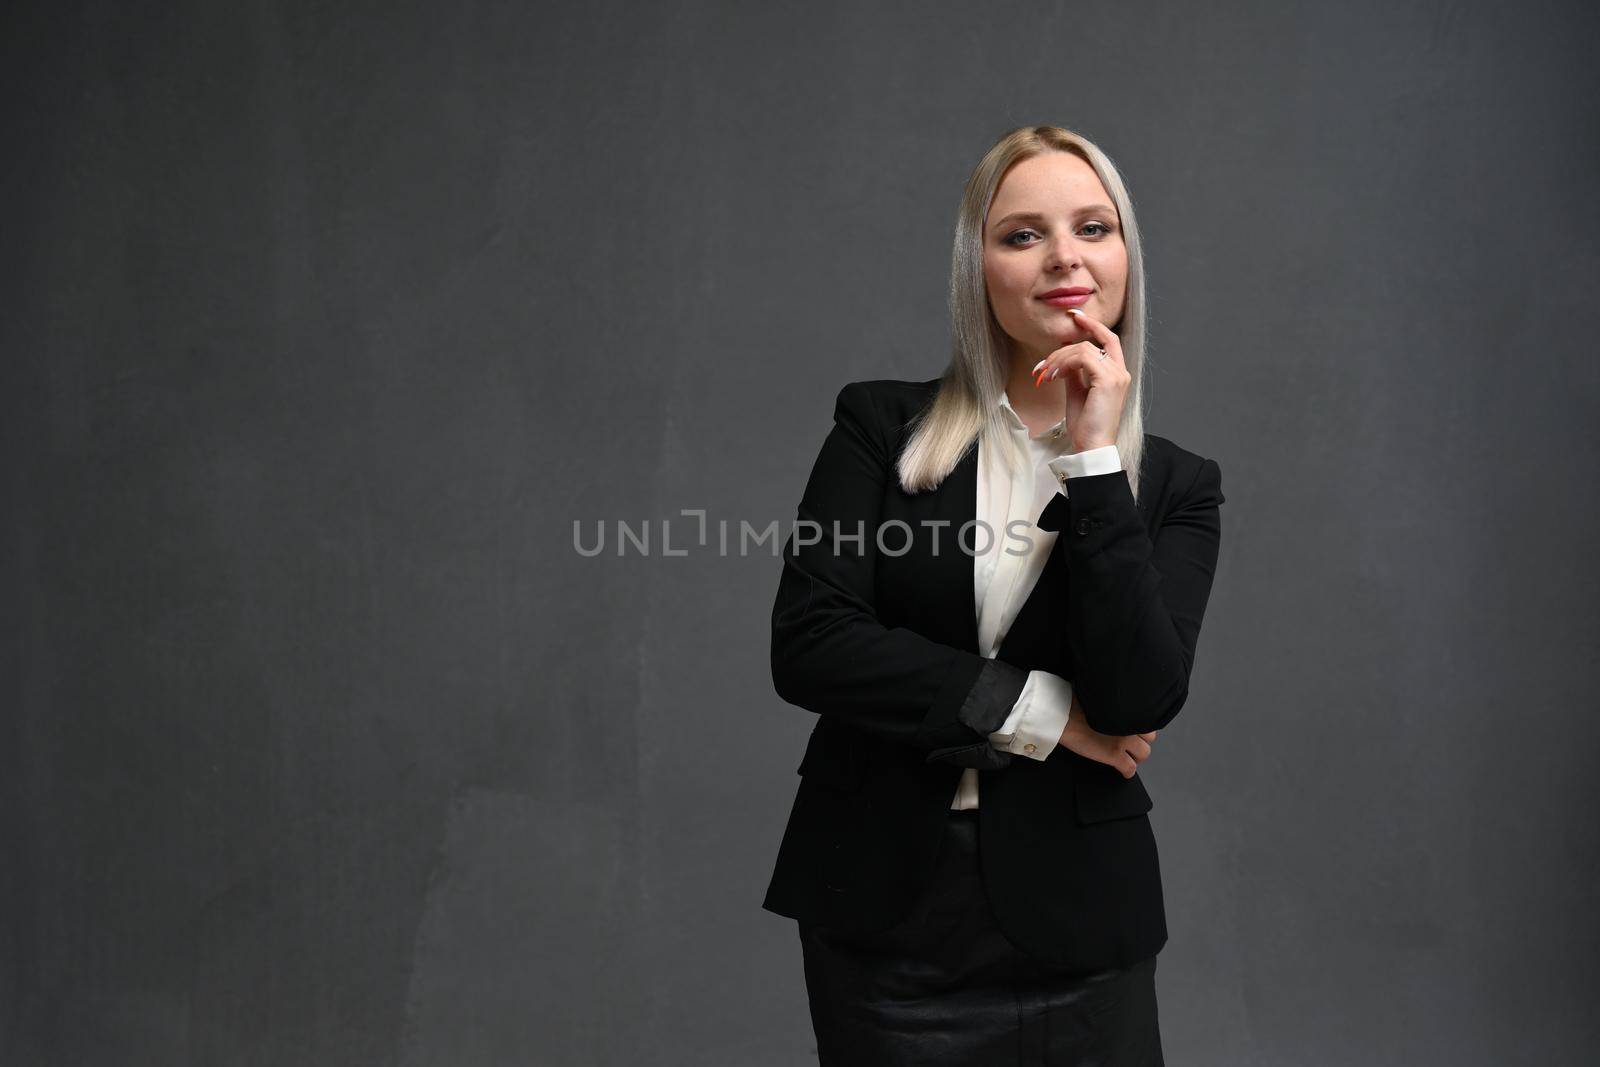 Beautiful blondy woman looking friendly and ready to help customer or client, holding hands together and staring at camera, gray background